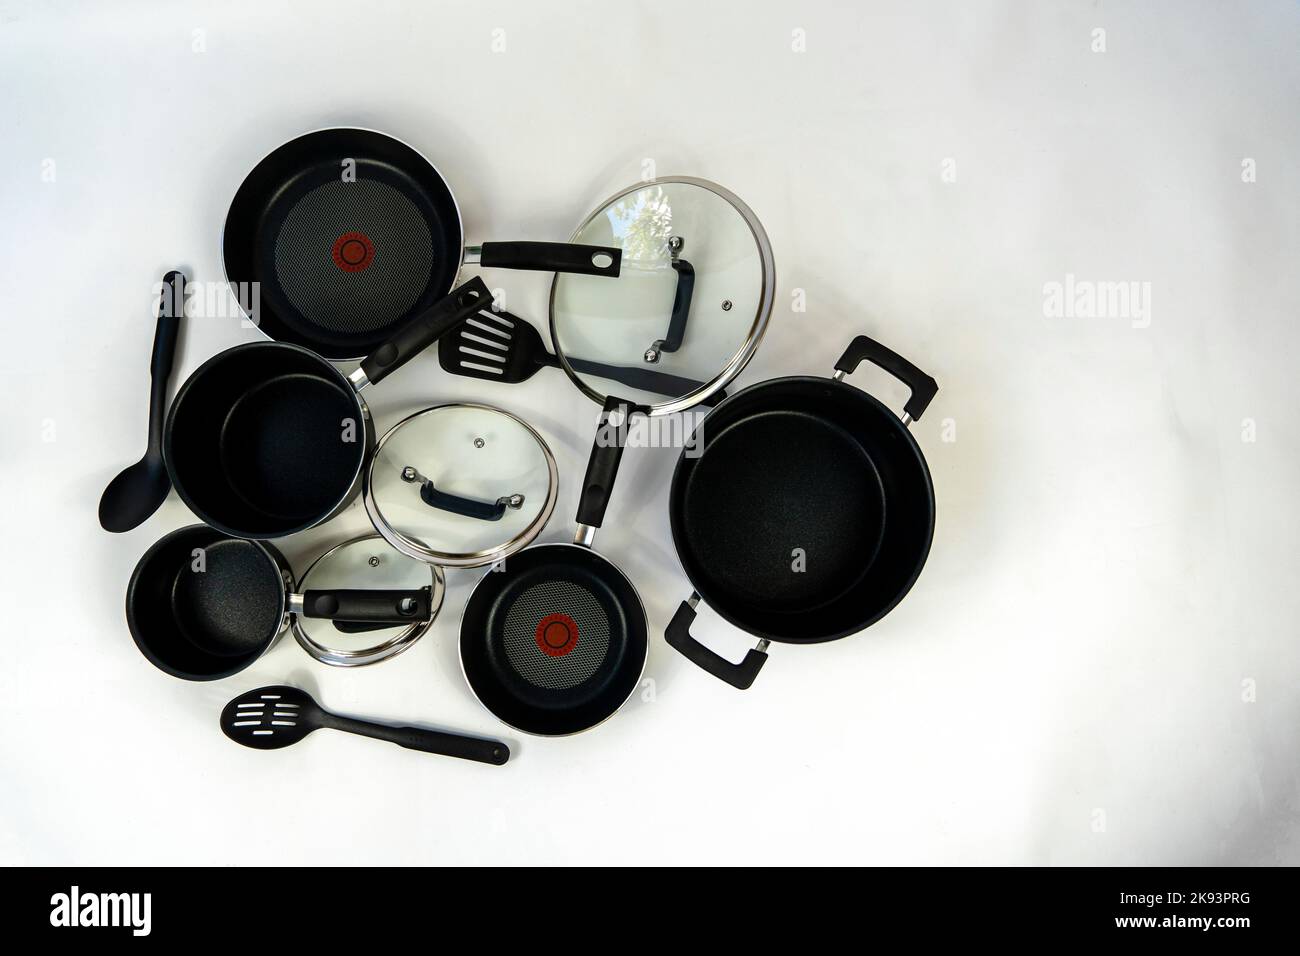 Set of aluminum cookware on kitchen counter, metal cookware, mexico latin america Stock Photo